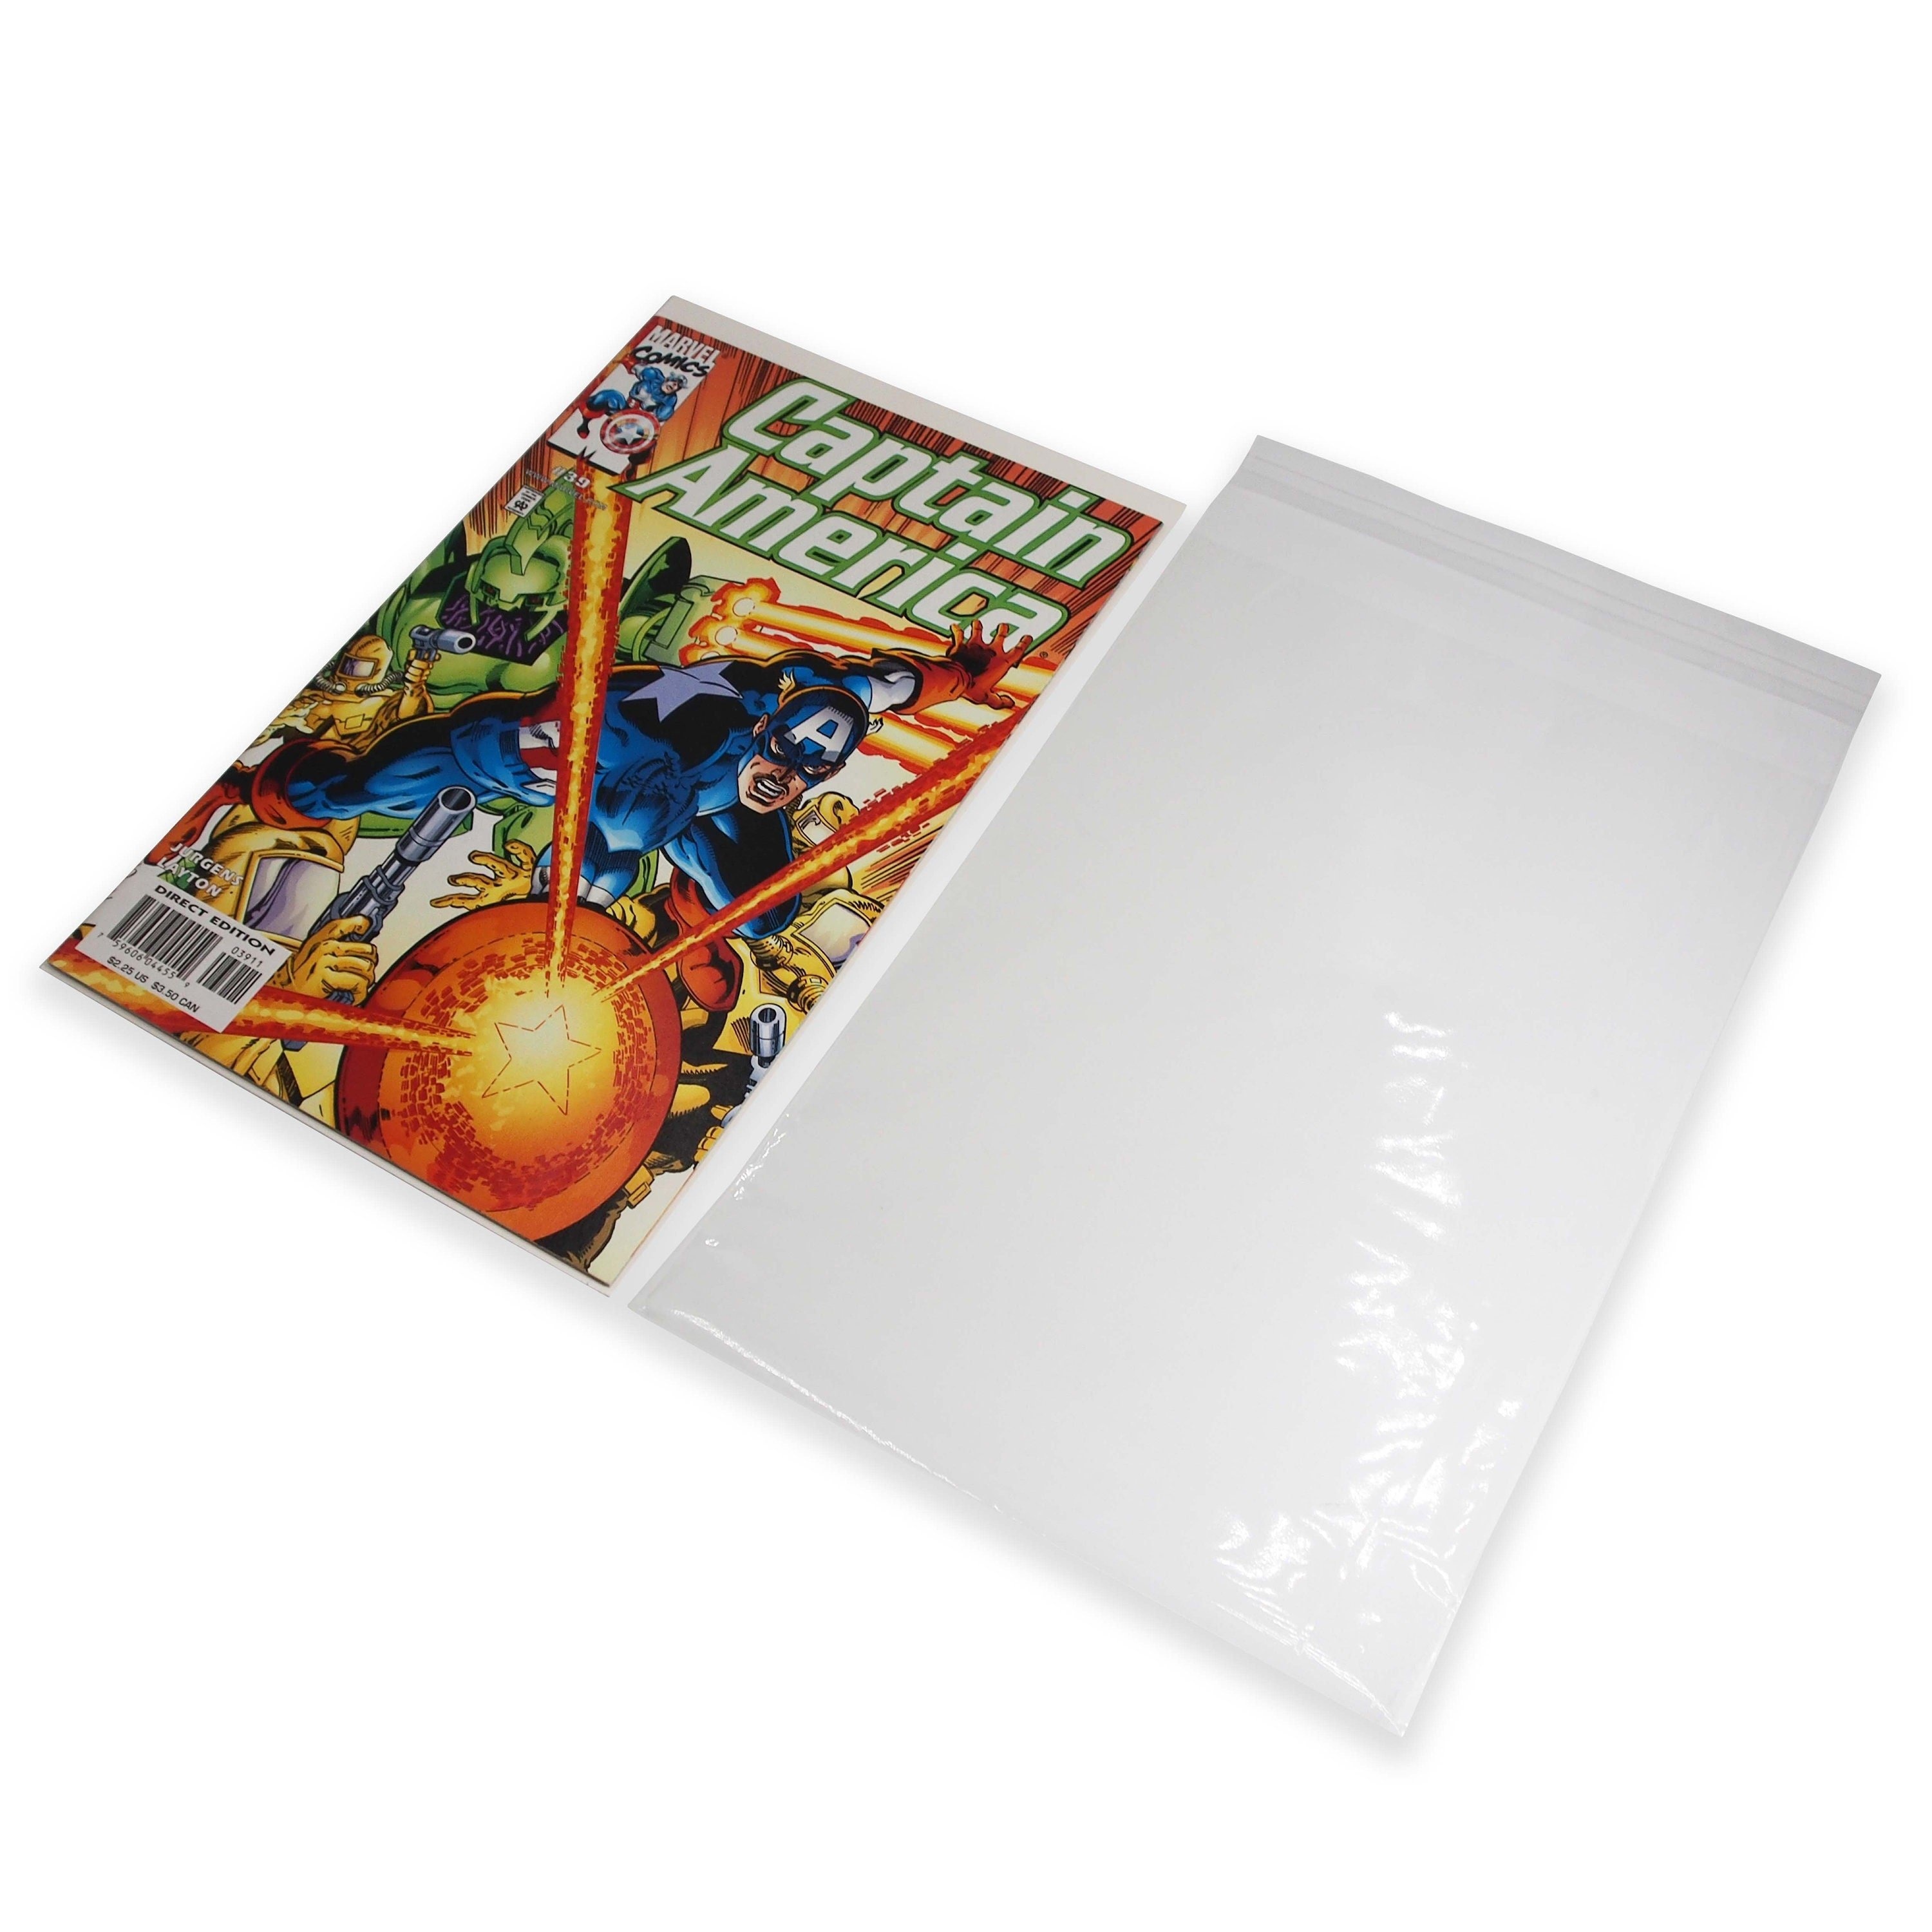 CheckOutStore Crystal Clear Current Age Thick Comic Book Bags /w Backi –